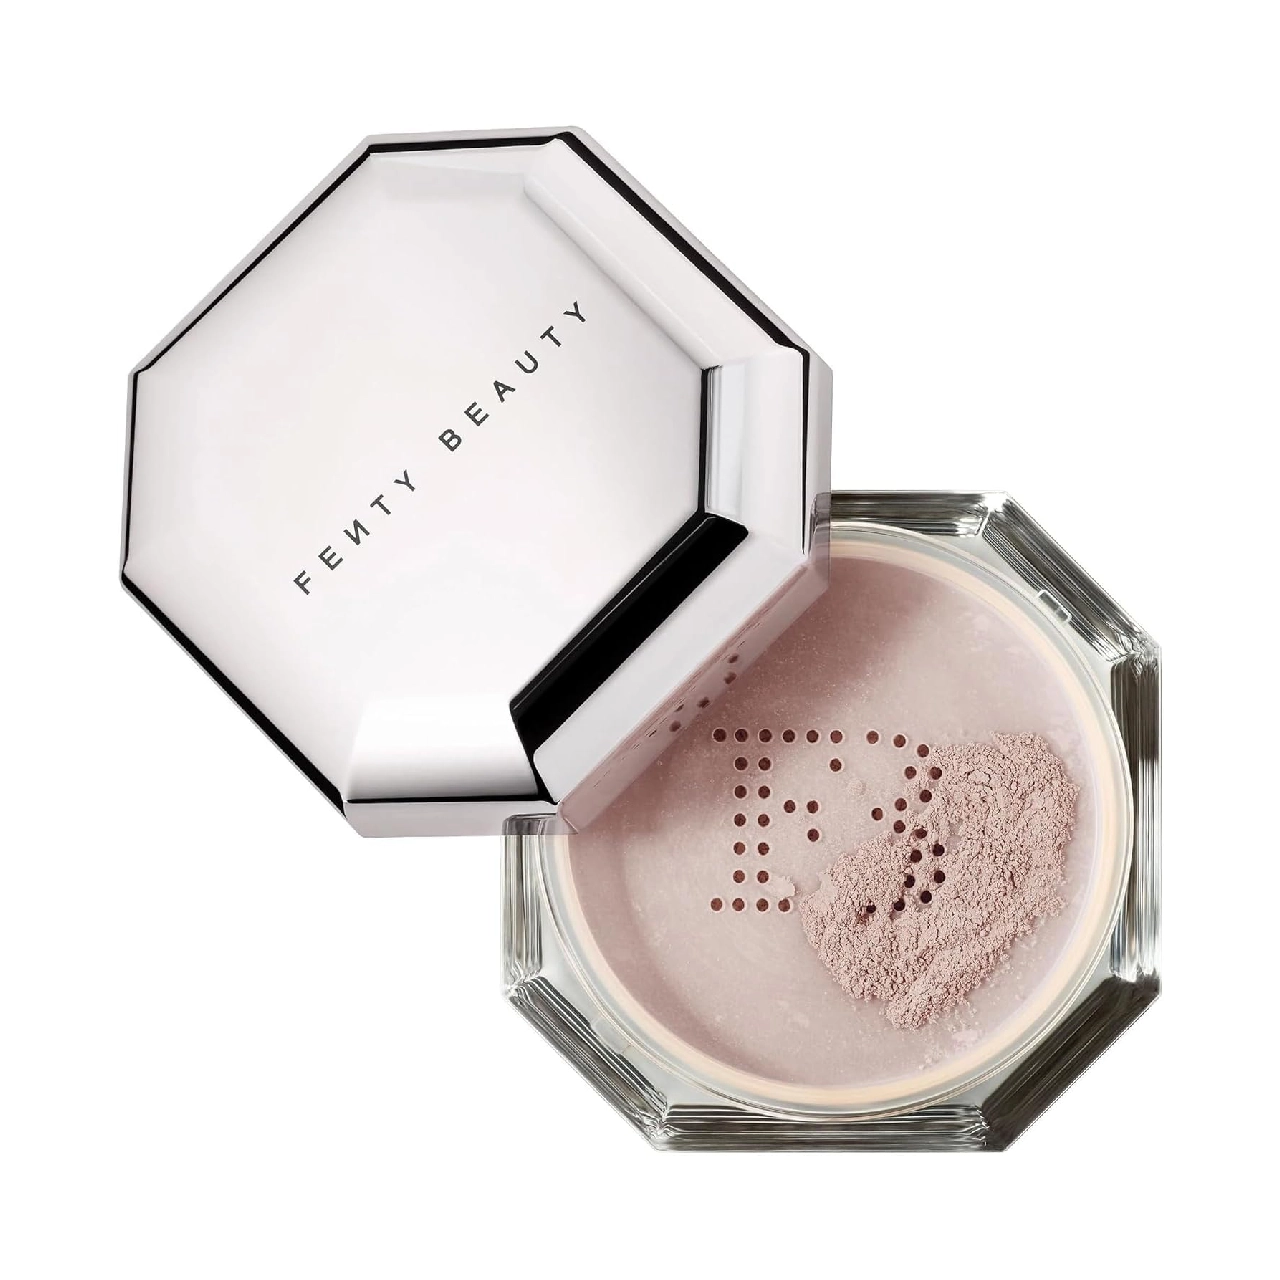 Fenty Beauty Pro Filt’r Instant Retouch Setting Powder in its container against a white background